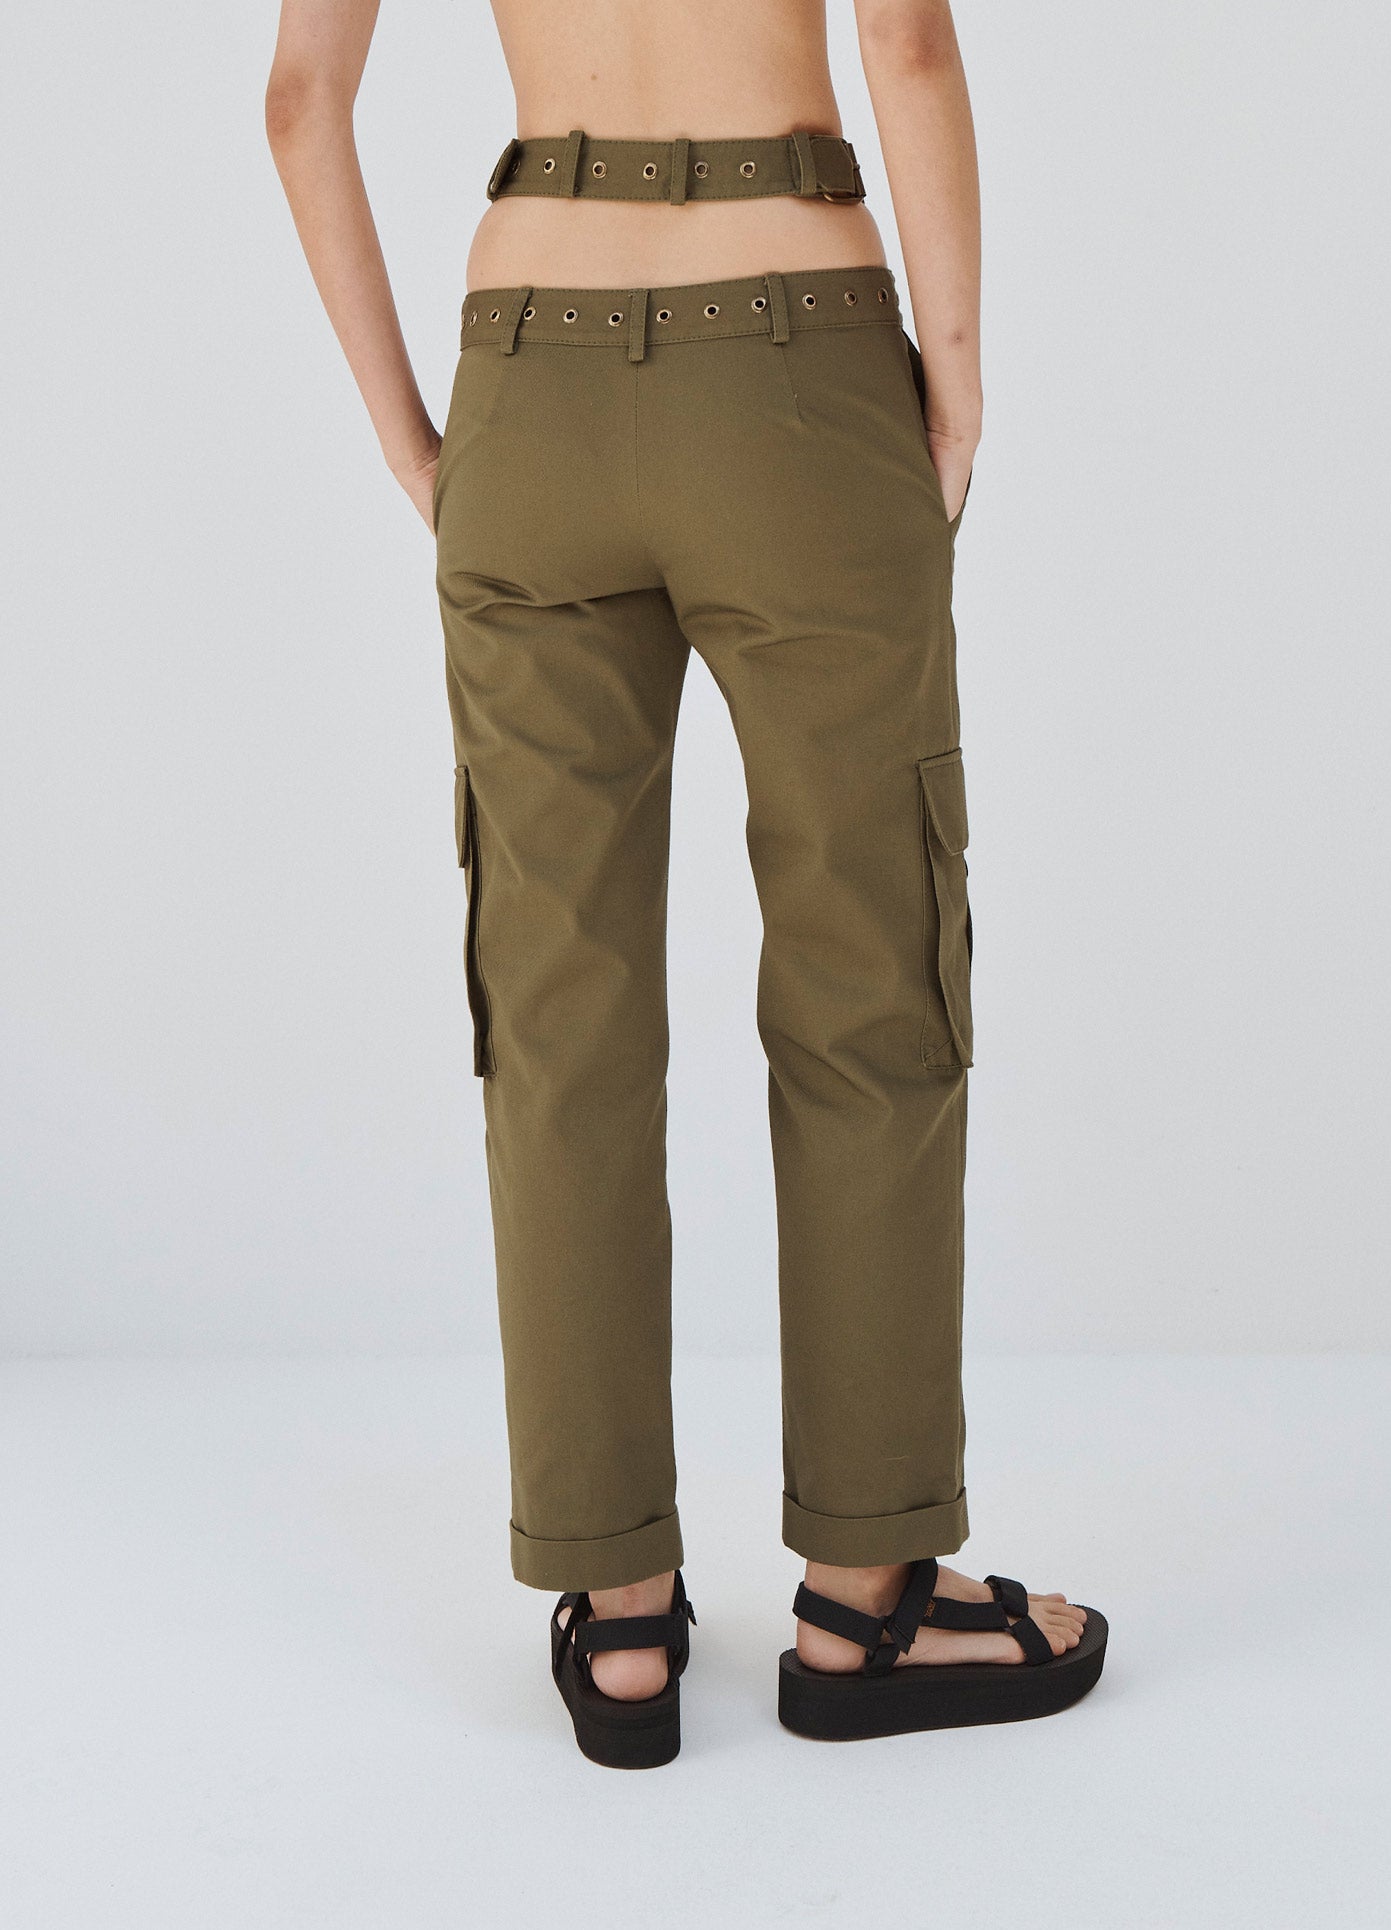 MONSE Criss Cross Waistband Cargo Pocket Pants in Olive on Model Back View